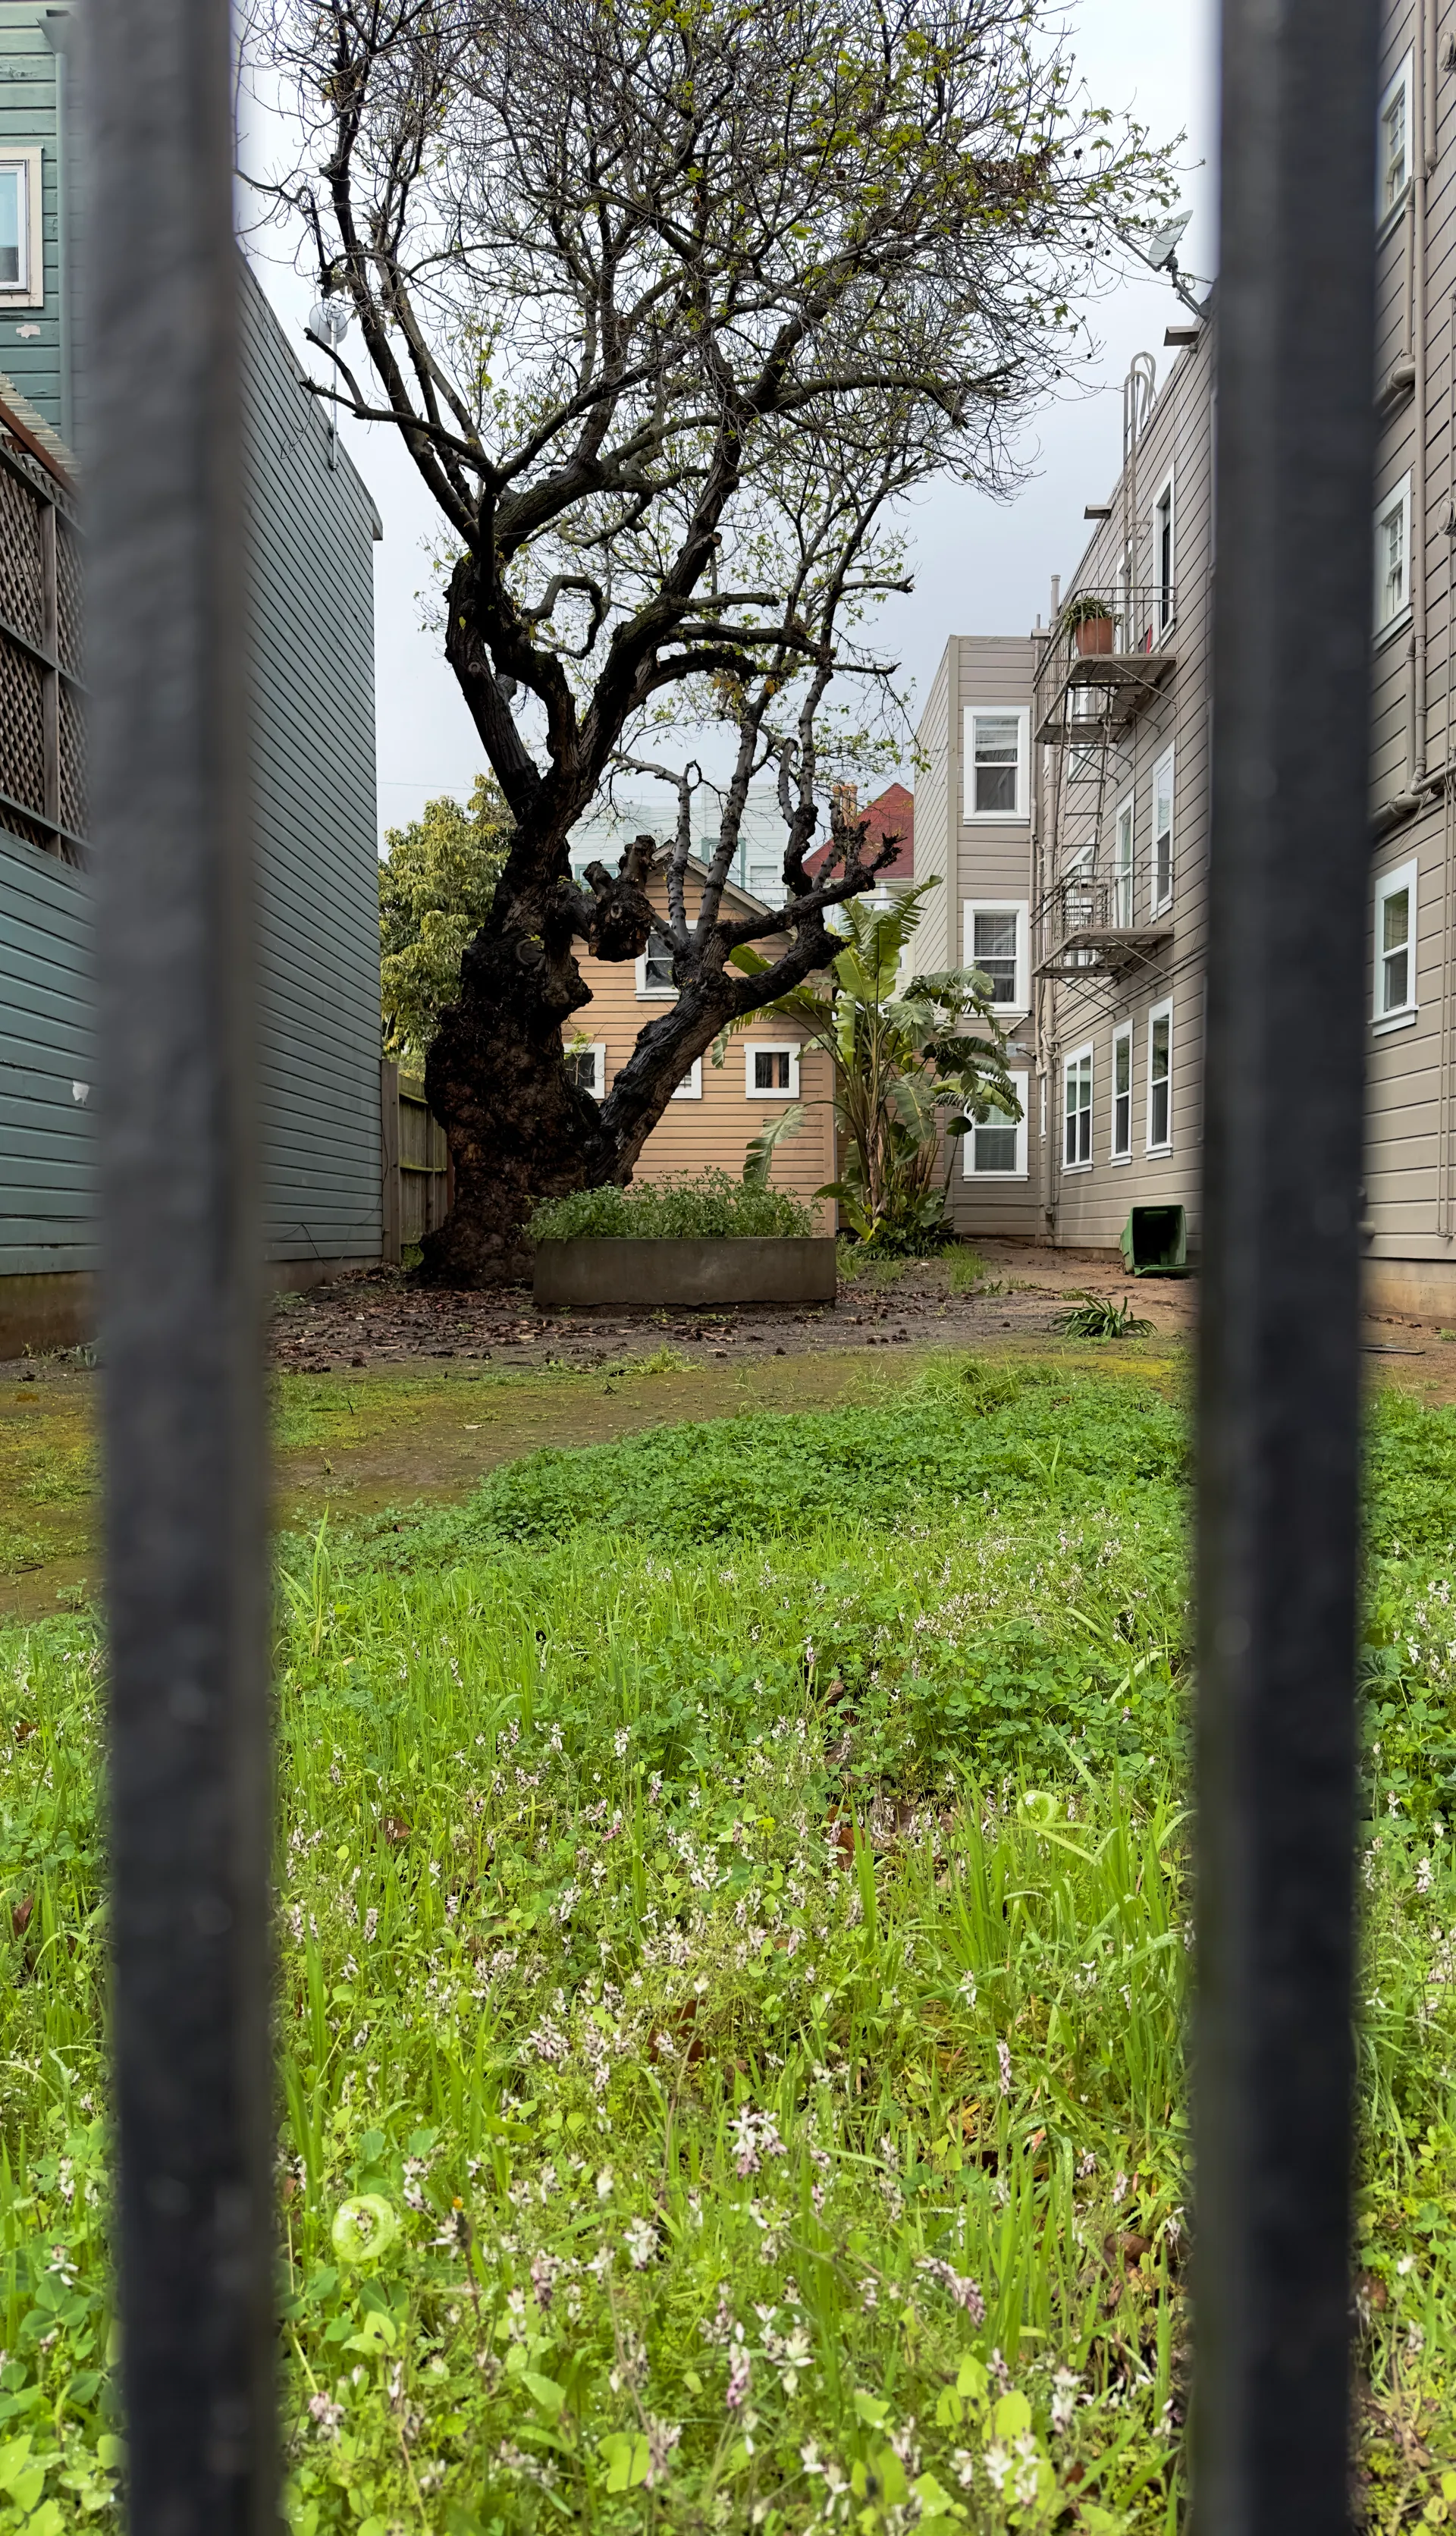 A view into a private yard in San Francisco